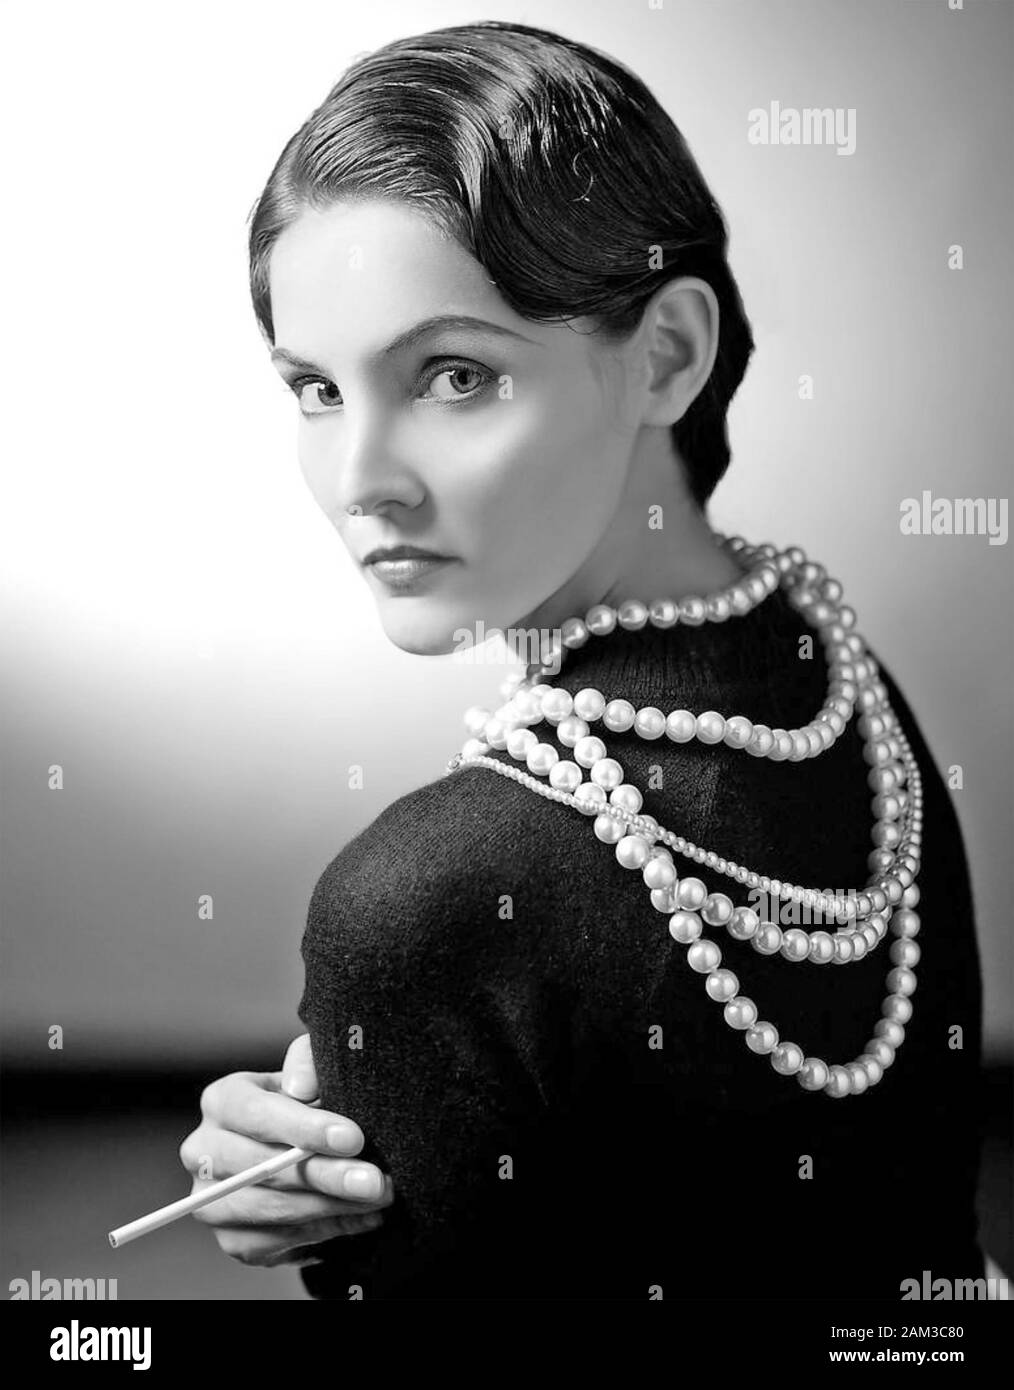 Chanel Black and White Stock Photos & Images - Alamy